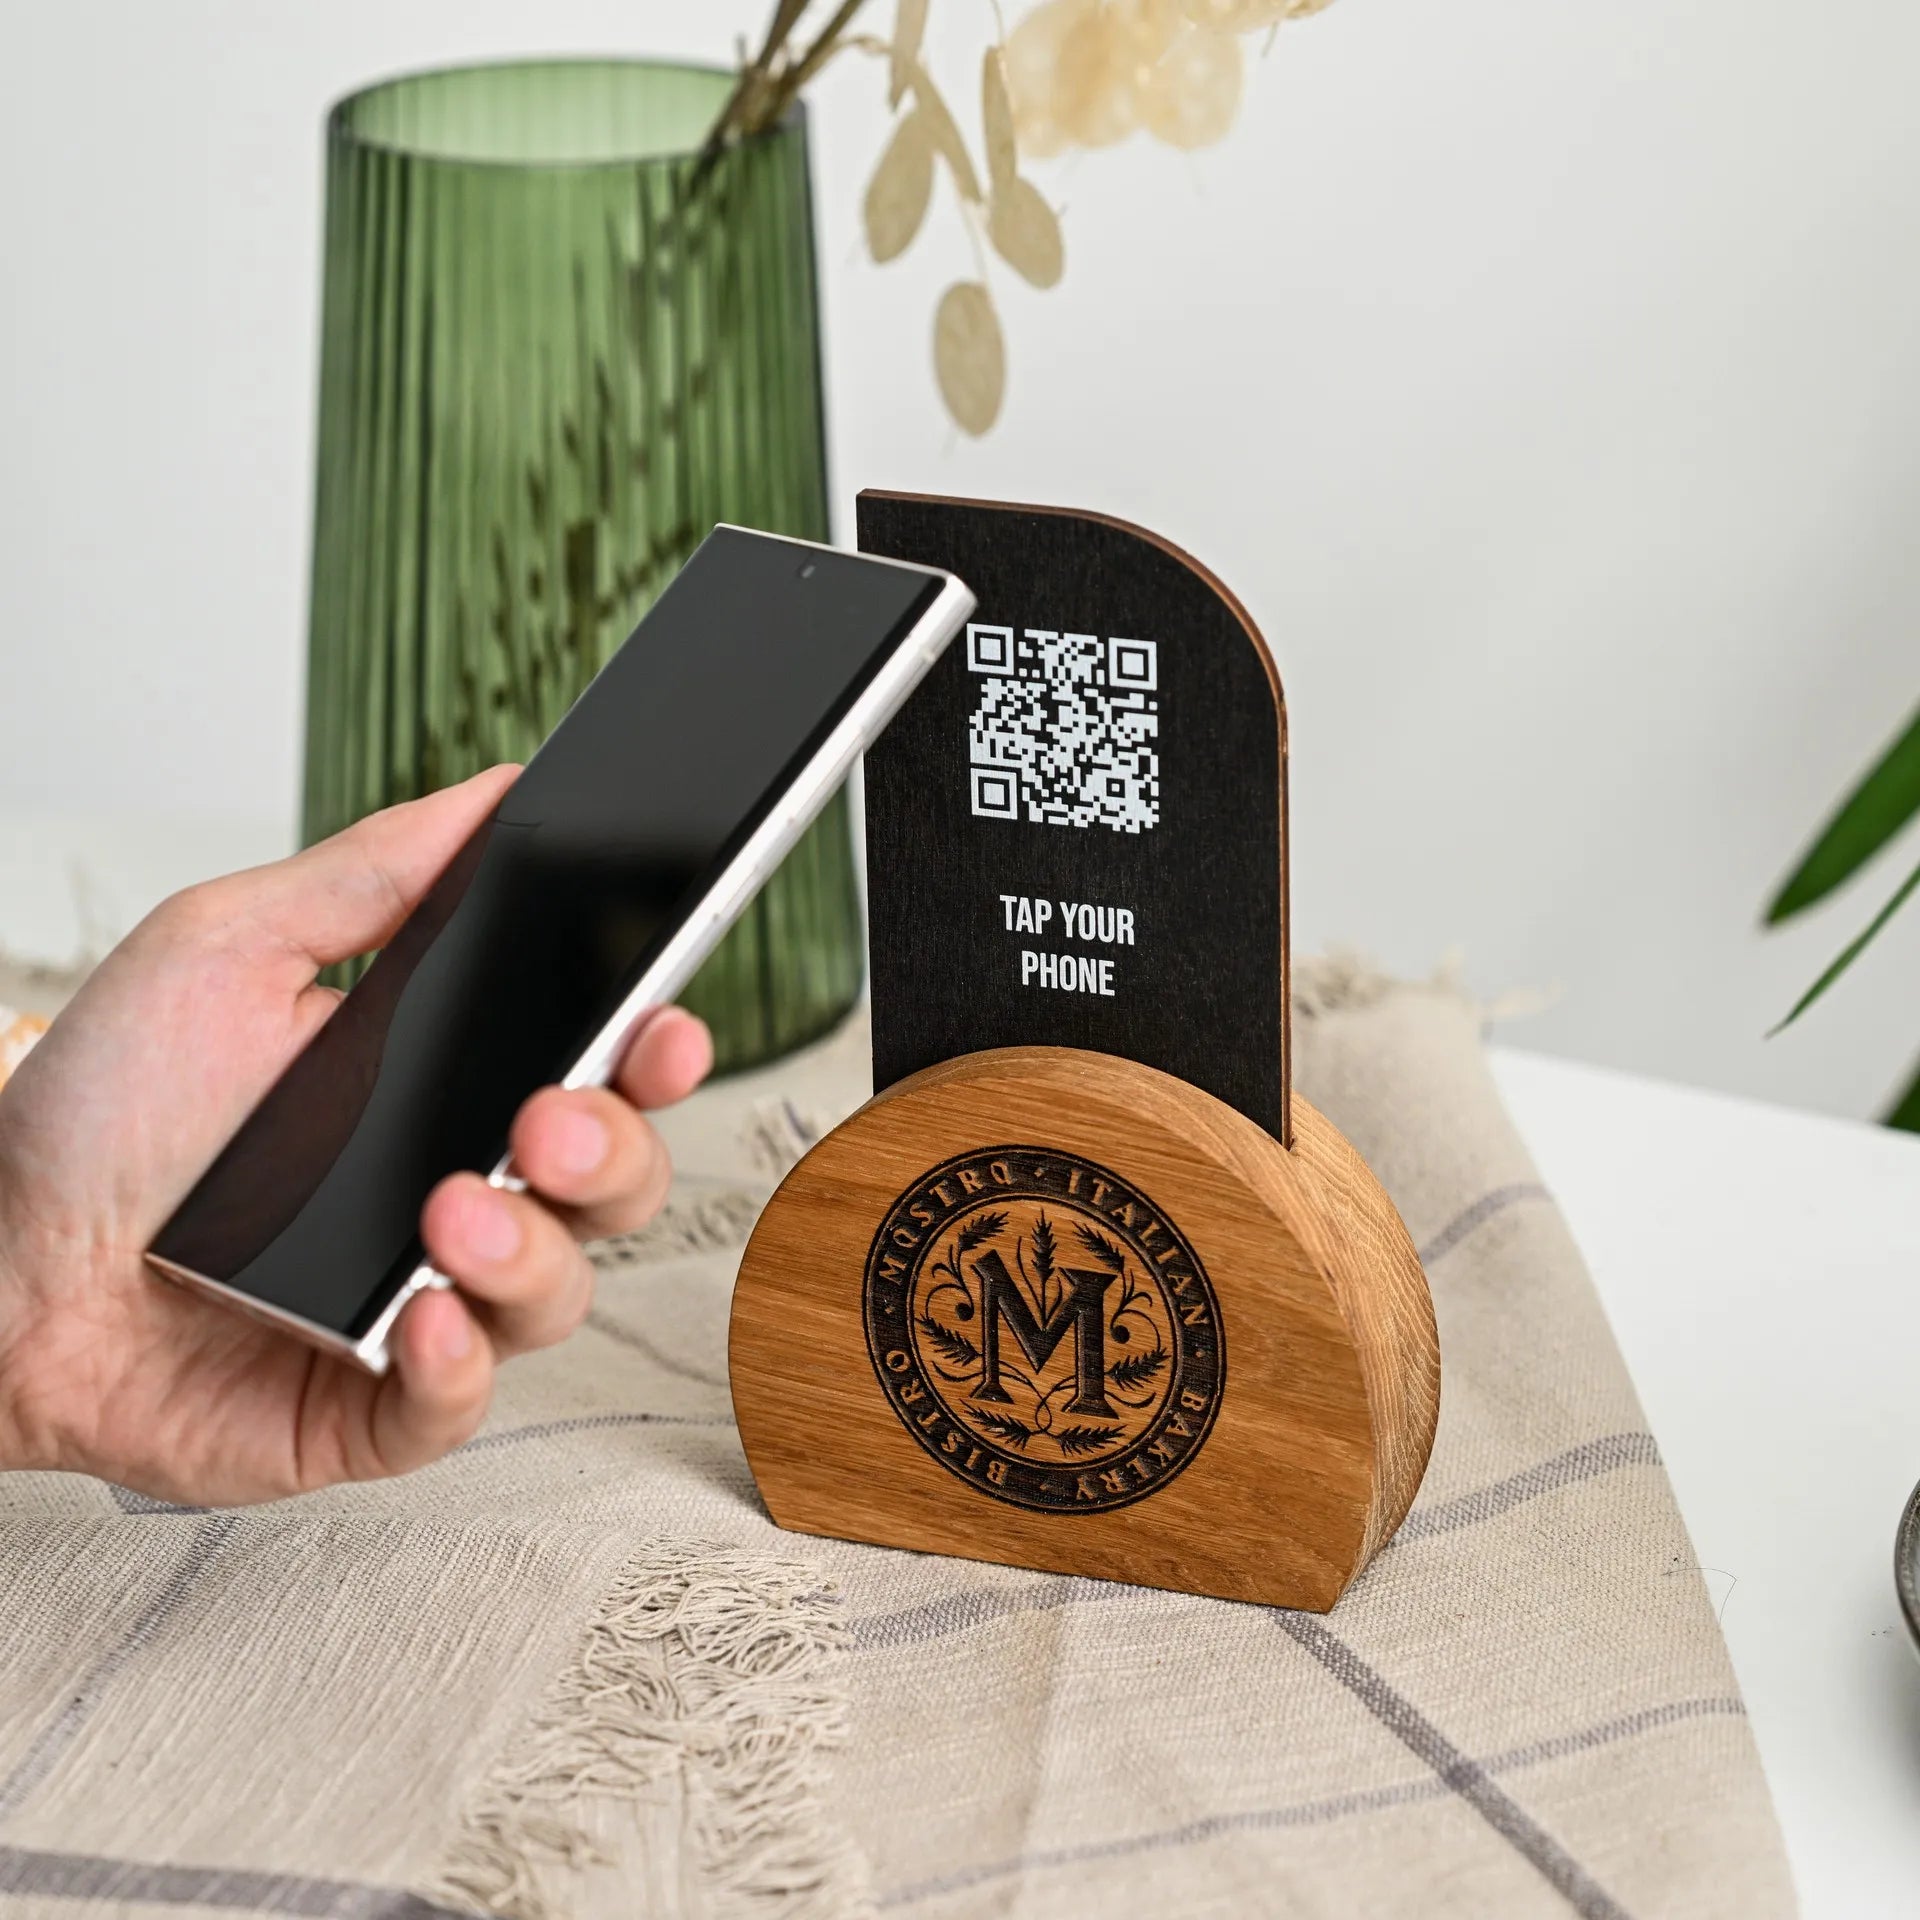 Step into the future of dining with our NFC tag and QR code sign elegantly displayed on a wooden stand, offering convenient access to information.